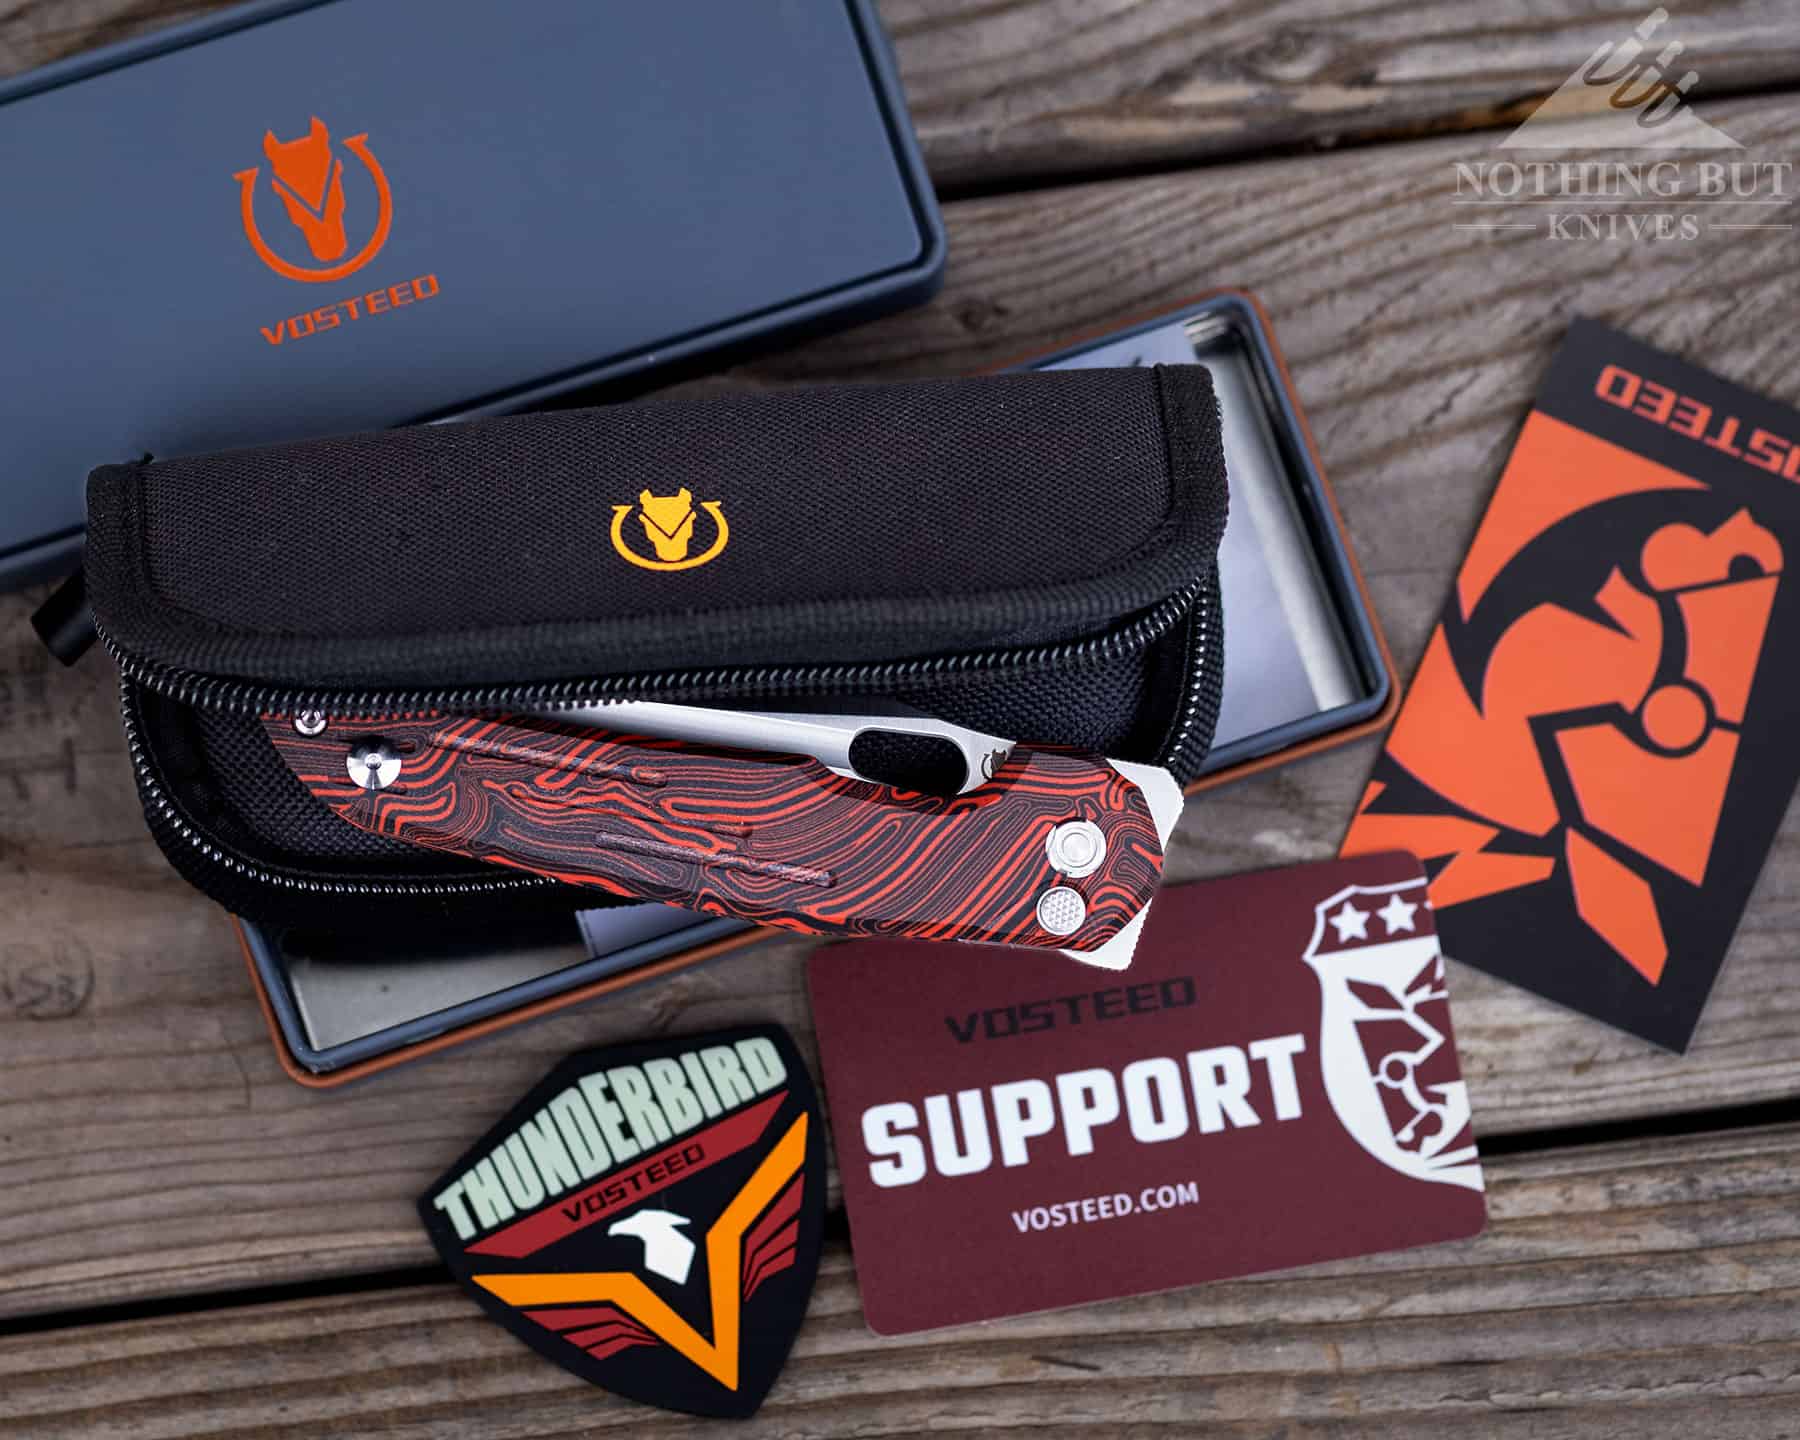 The Thunderbird ships in a great looking case with some swag. 